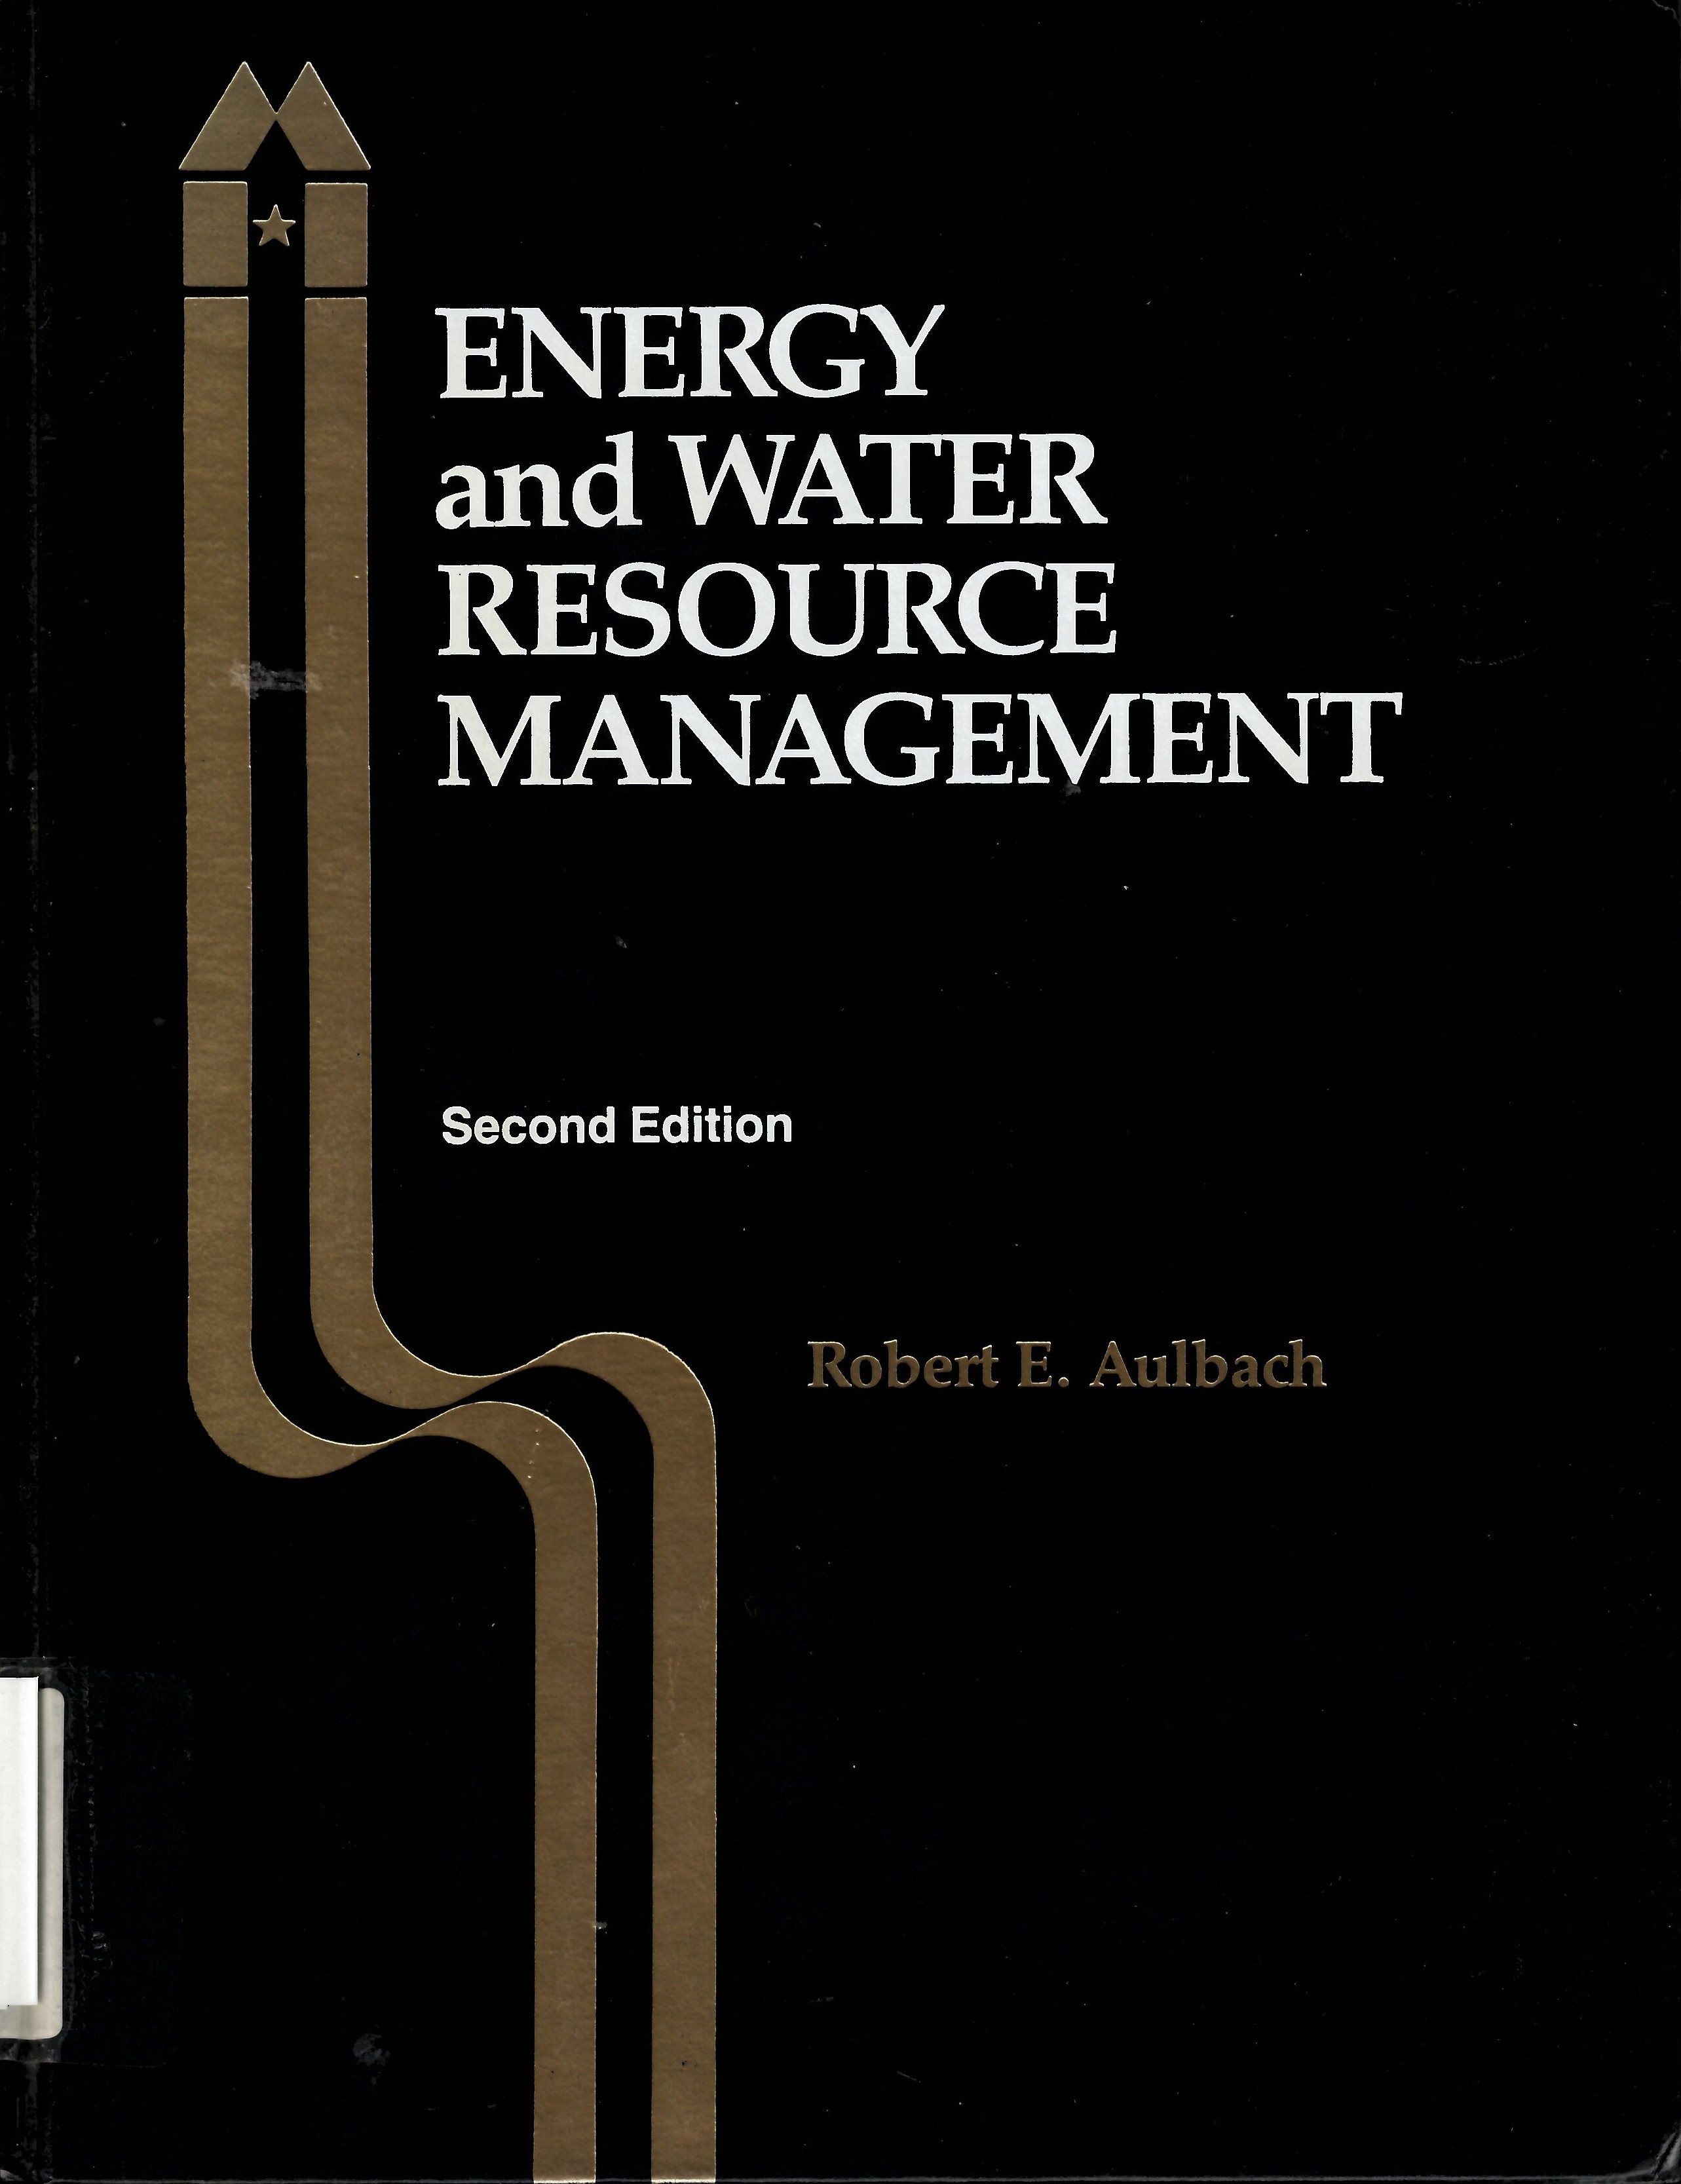 Energy and water resource management